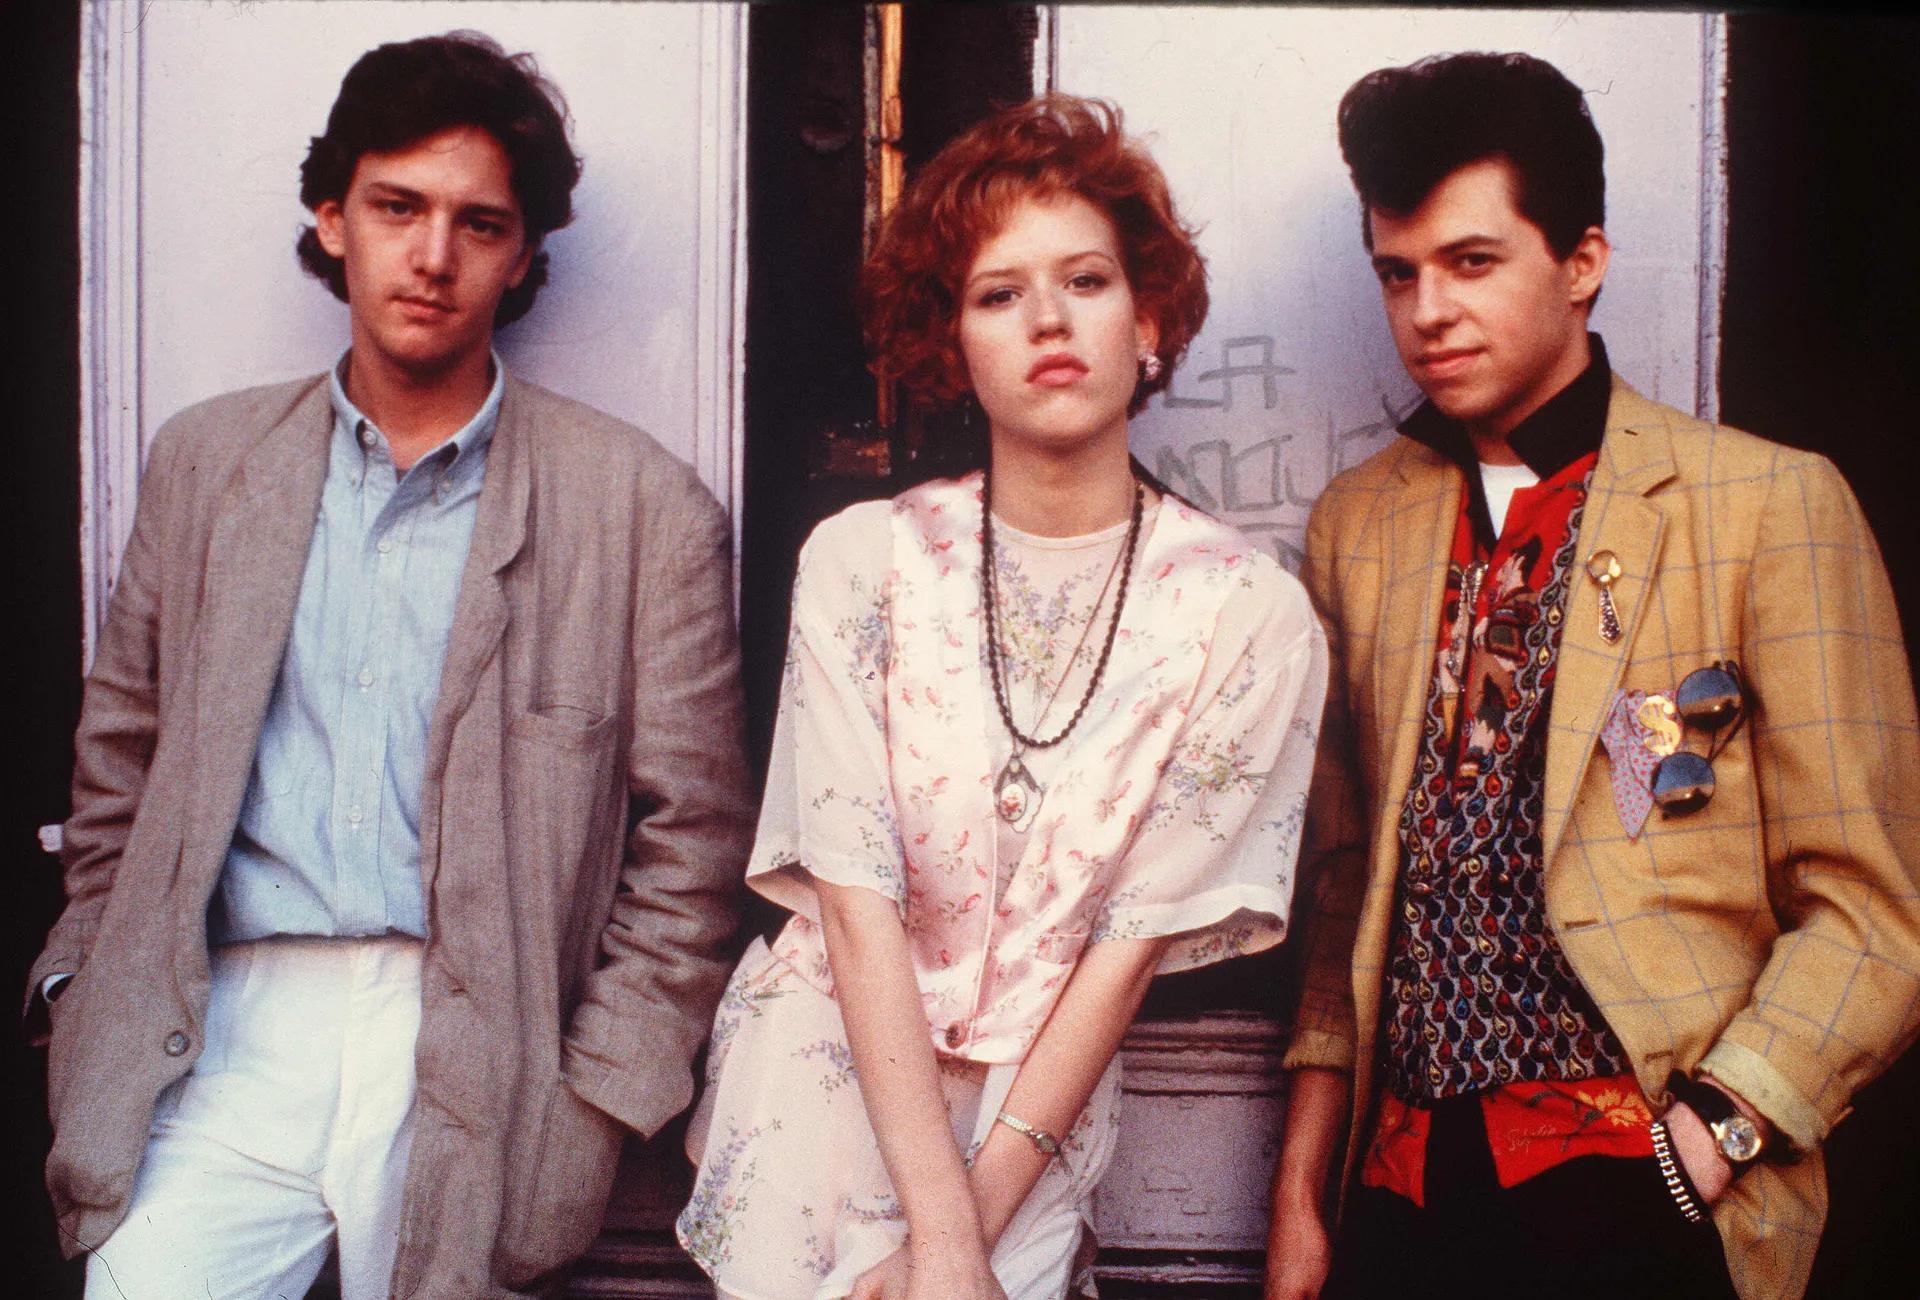 Three friends standing together wearing vintage fashion clothing.